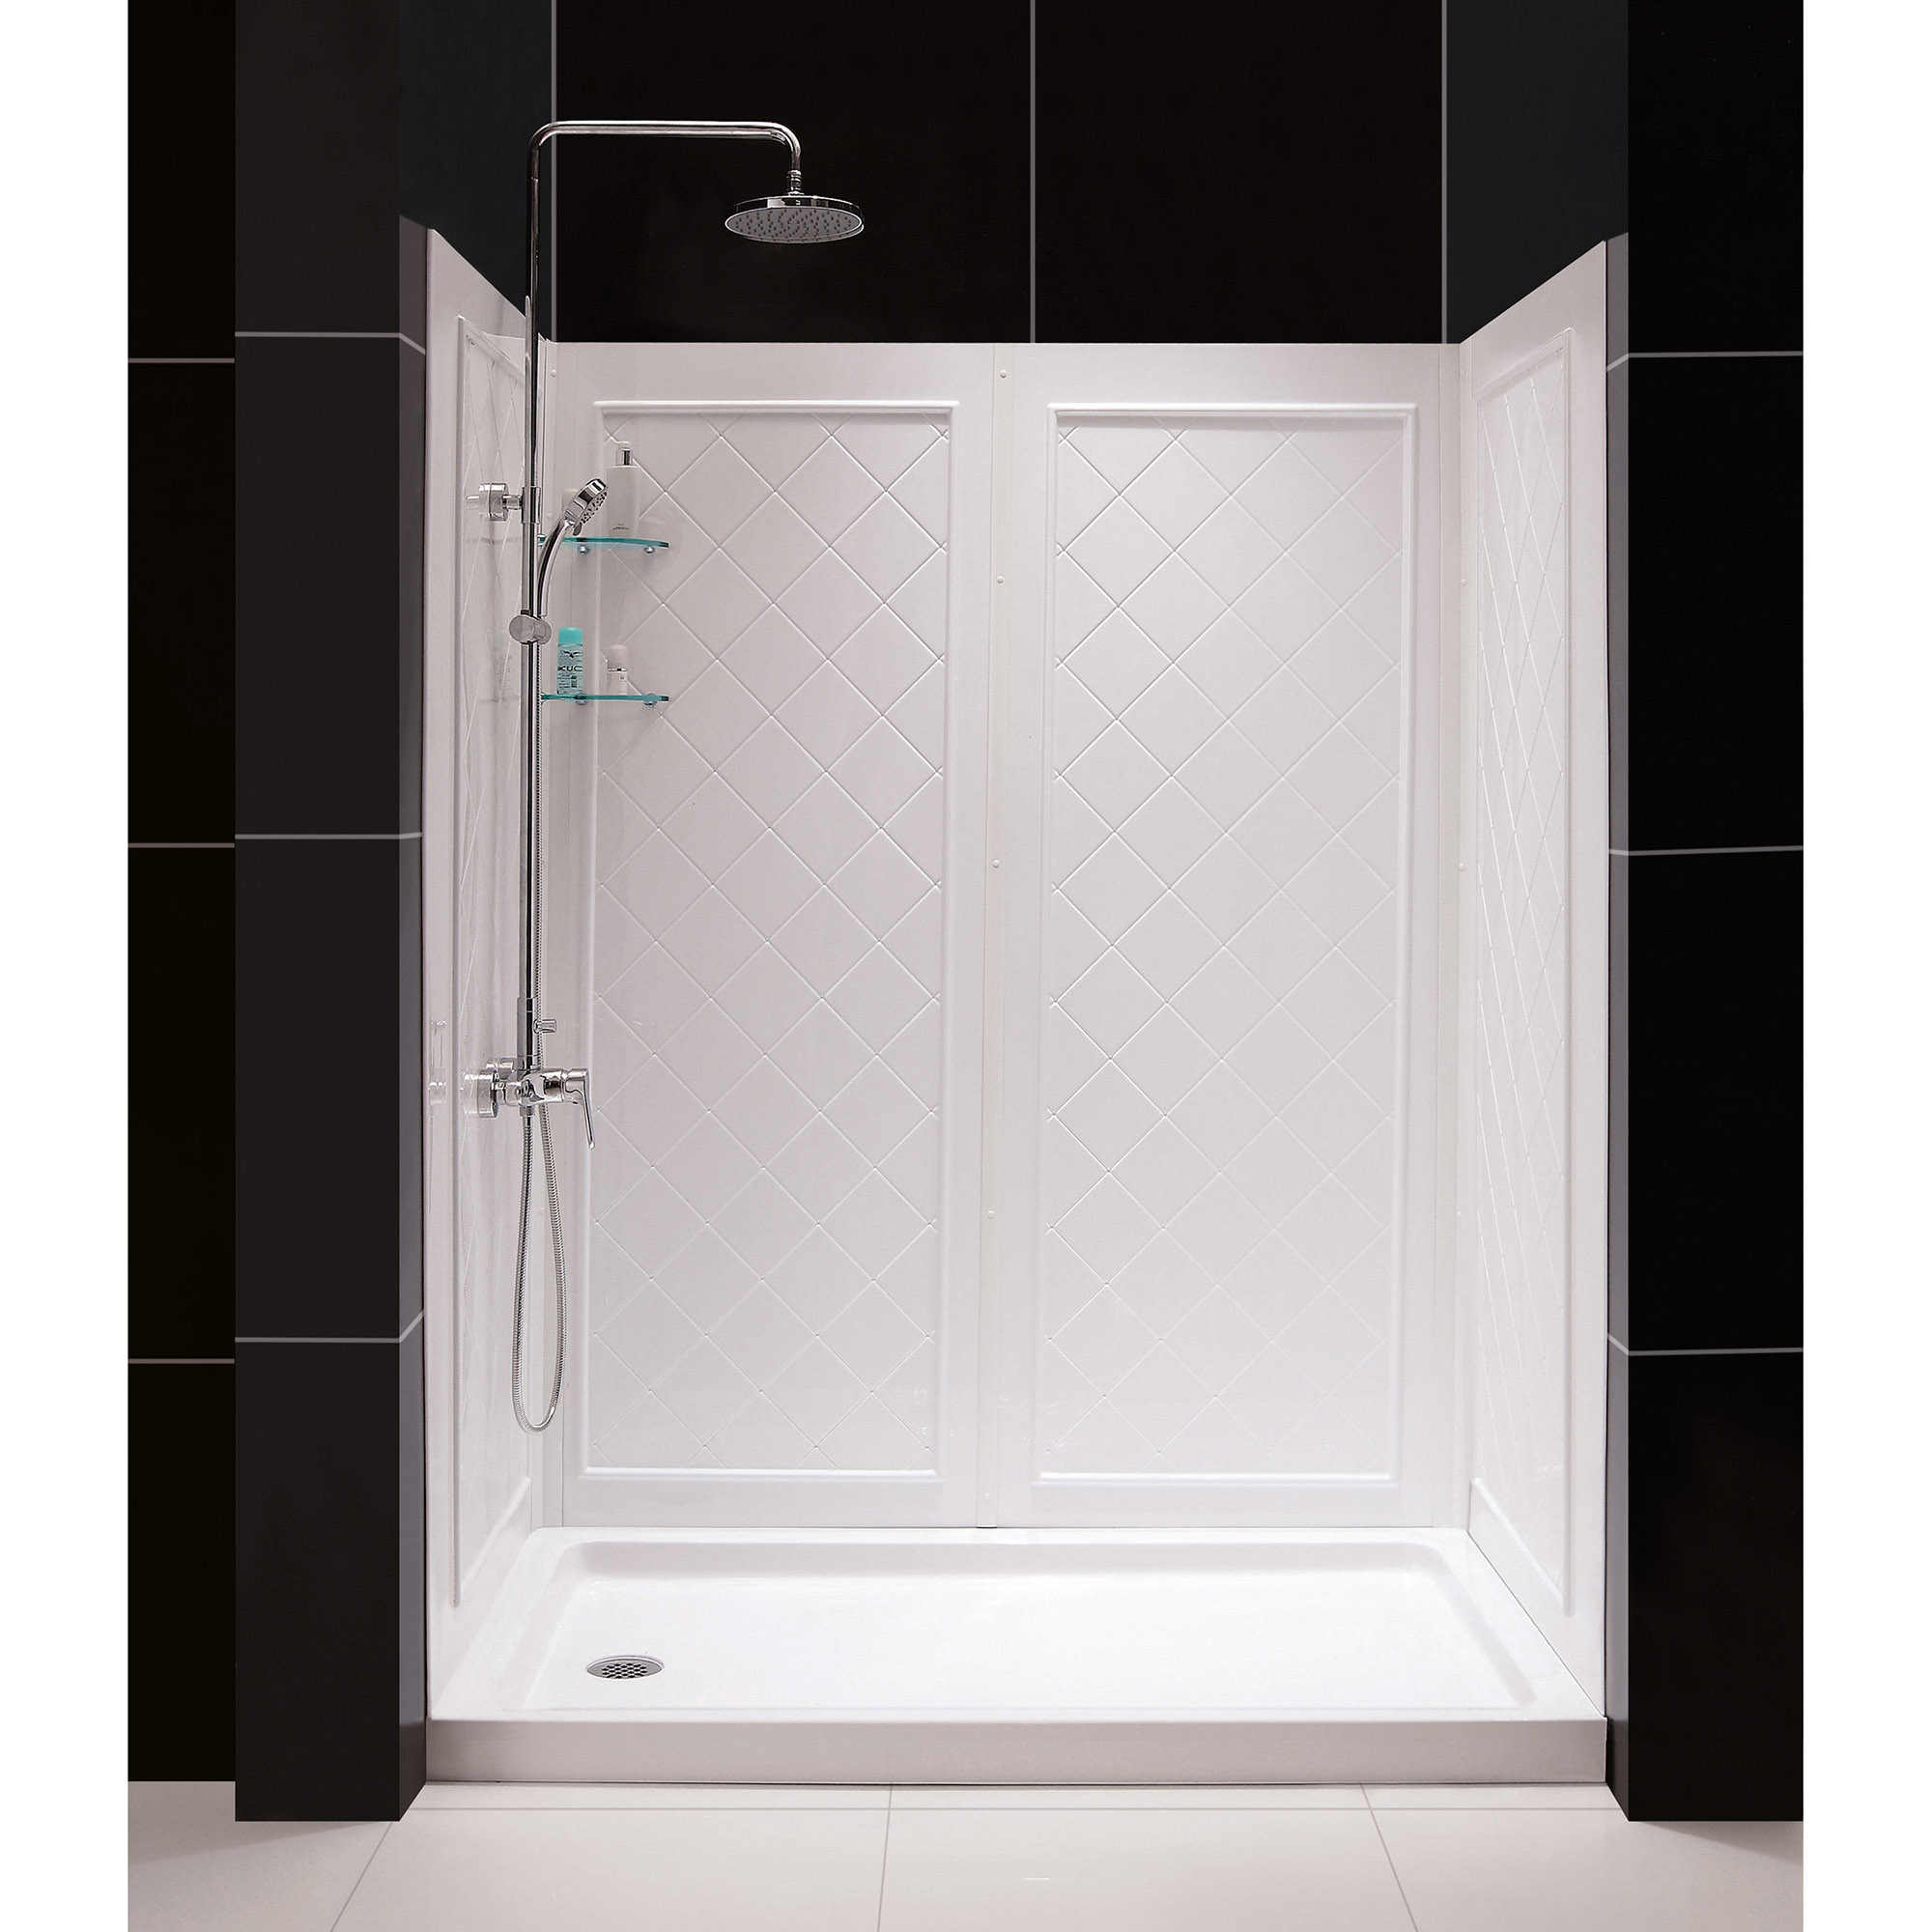 DreamLine 34 in. D x 60 in. W x 76 3/4 in. H Left Drain Acrylic Shower Base and QWALL-5 Backwall Kit In White - image 1 of 11